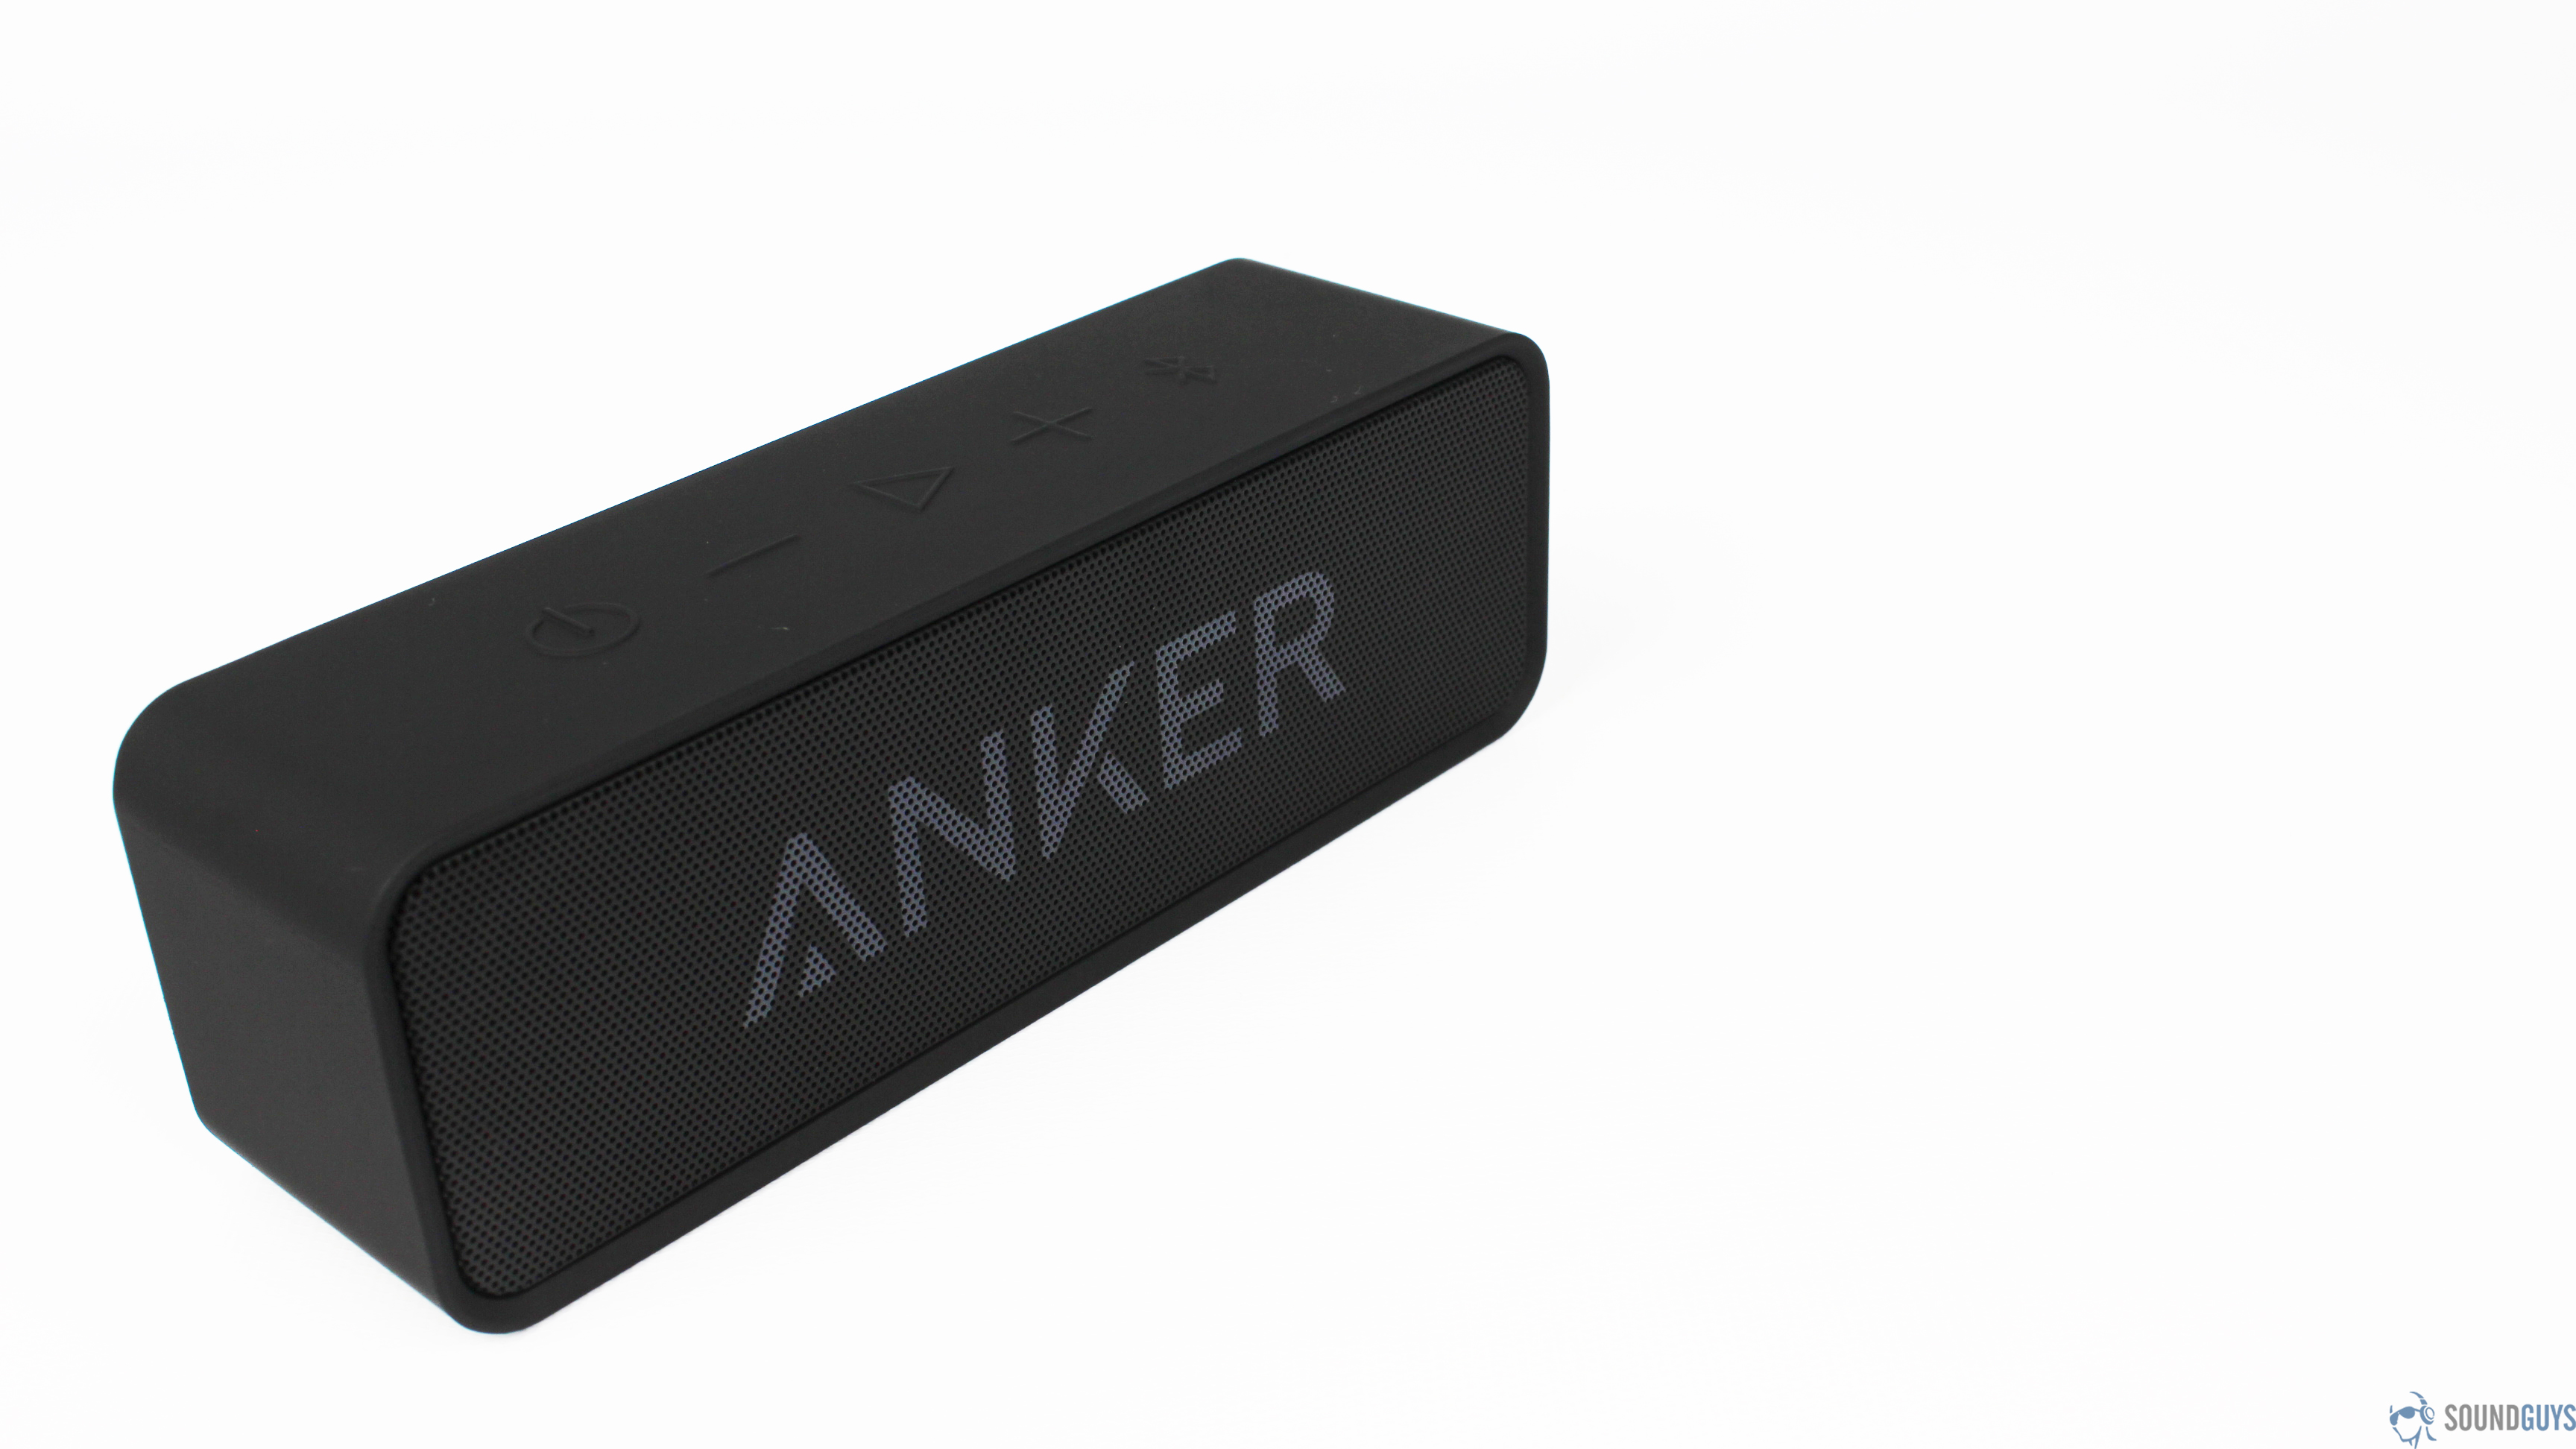 Dual high-performance drivers and a unique spiral bass port deliver great sound quality with the Anker Soundcore. Pictured: The speaker at an angle, closest on the left side of the screen.